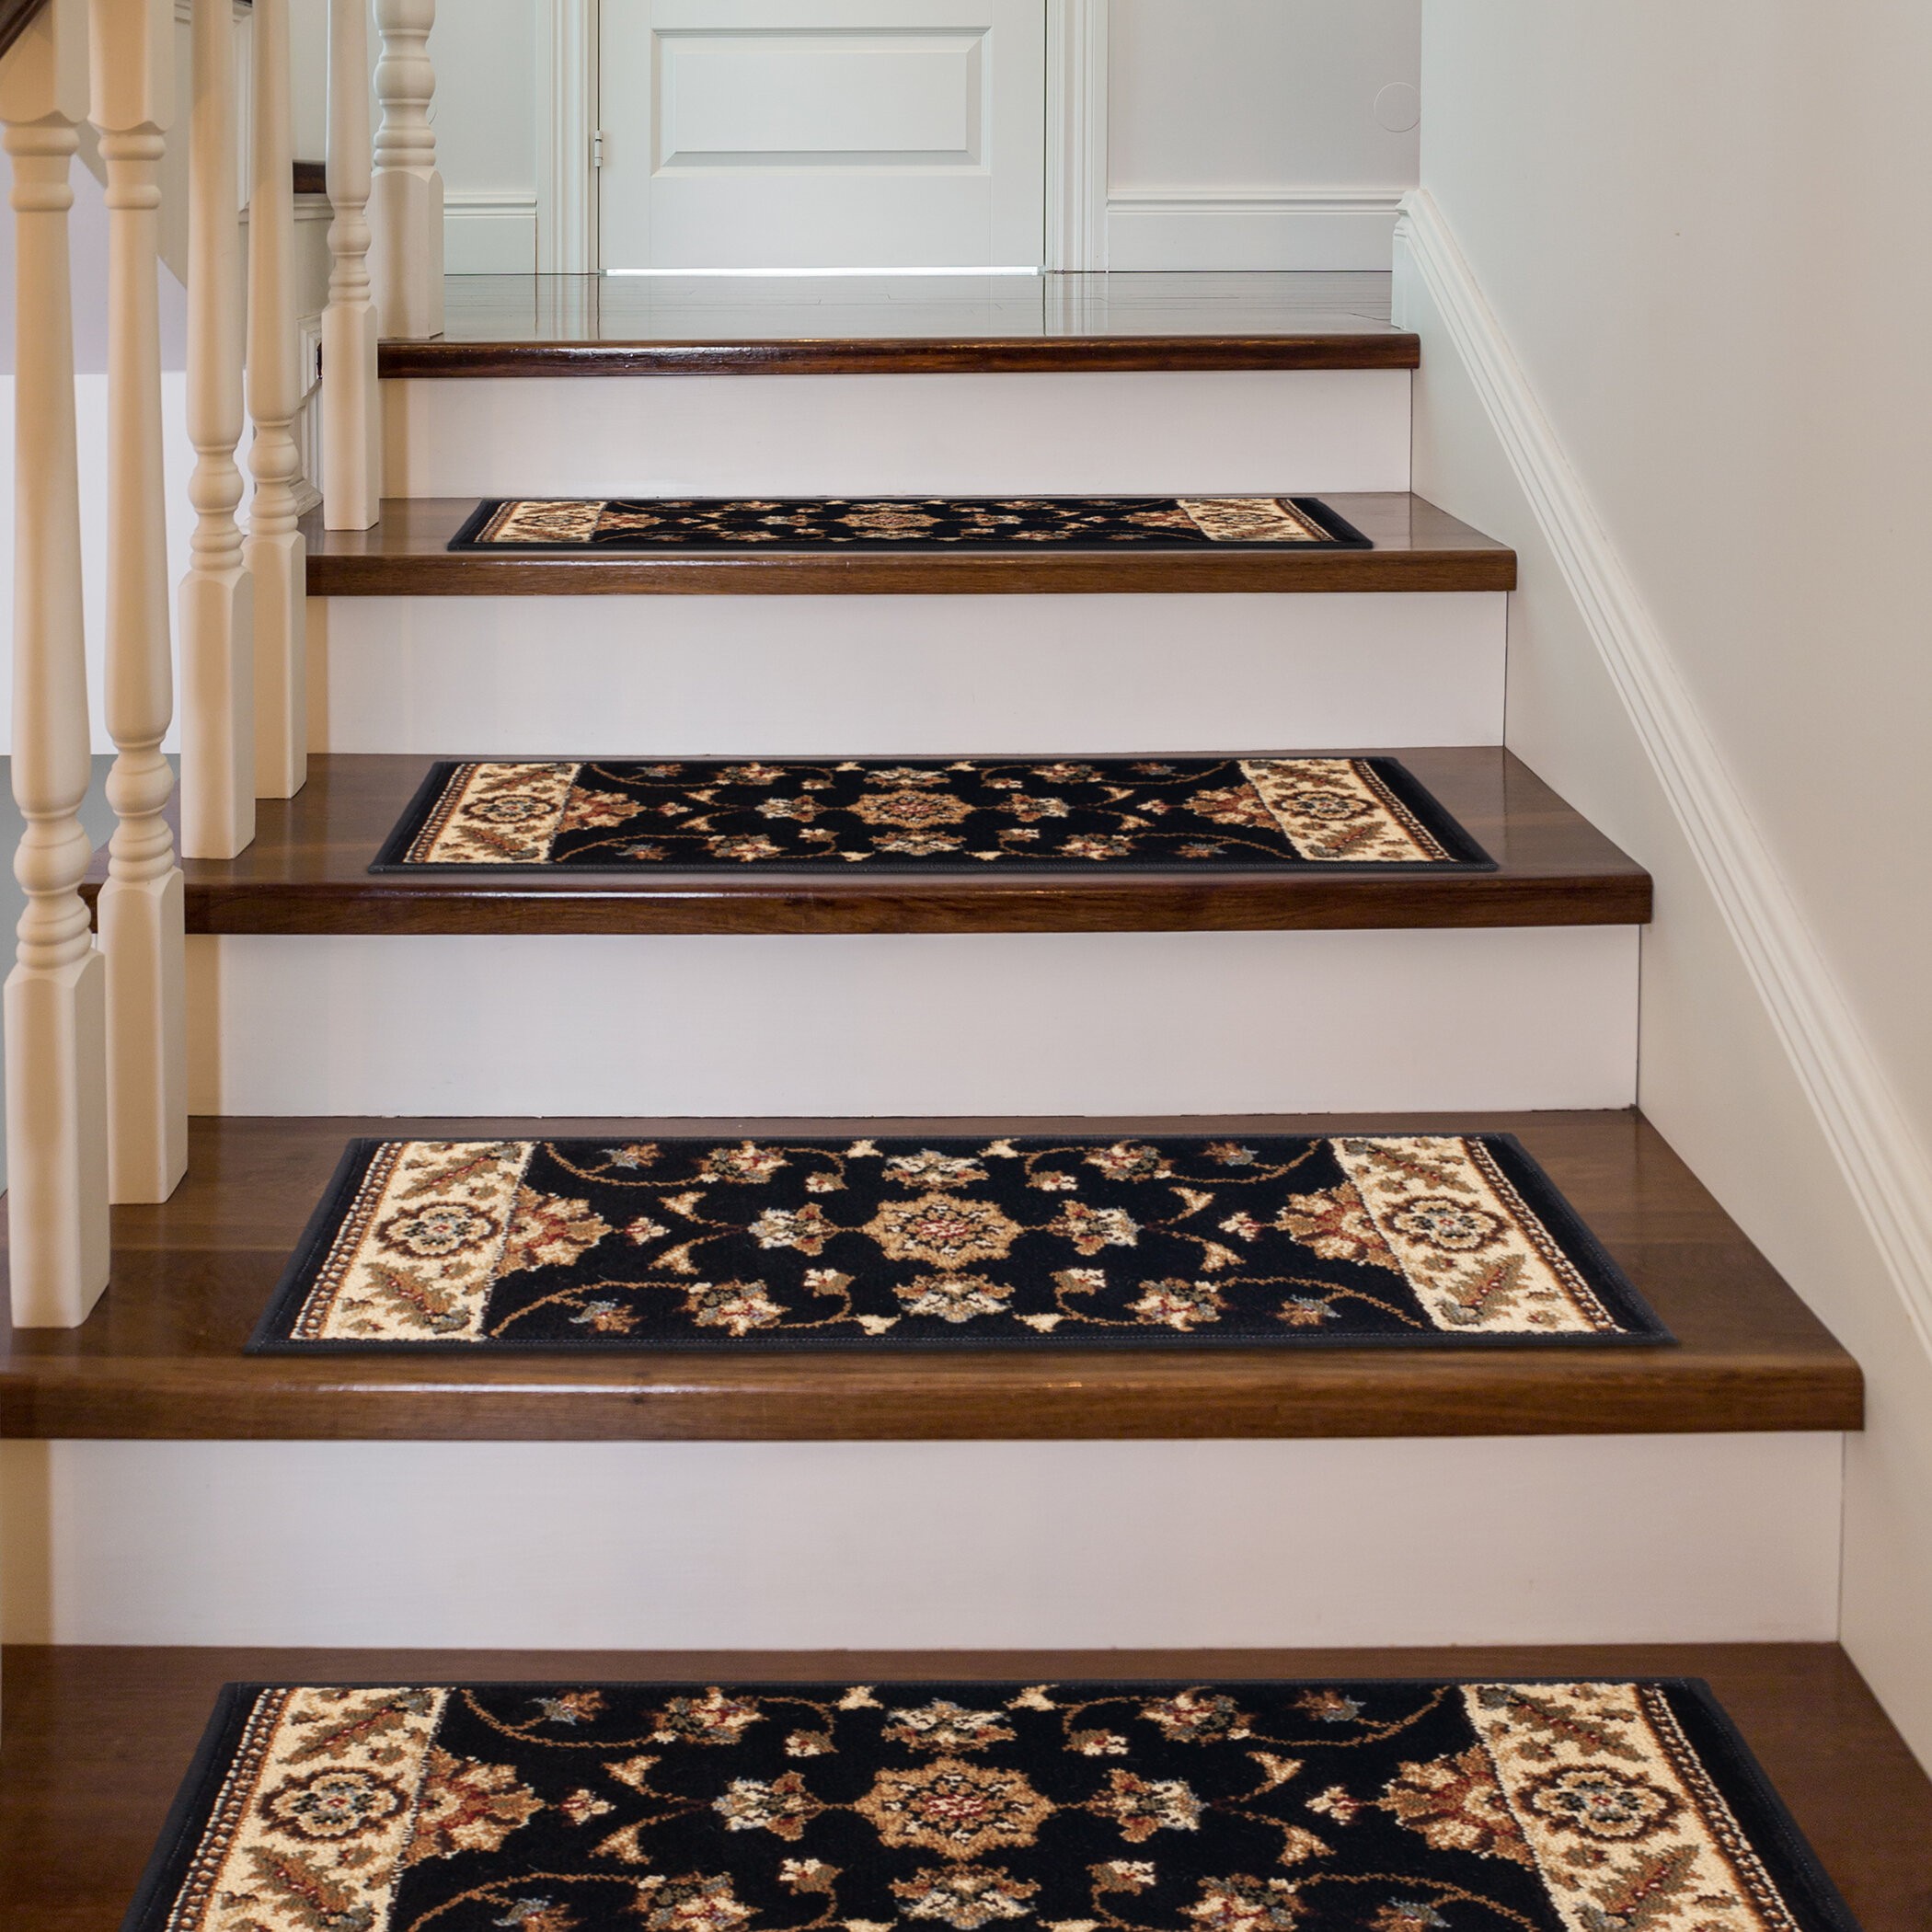 10 Best Stair Tread Rugs for 2021 Ideas on Foter